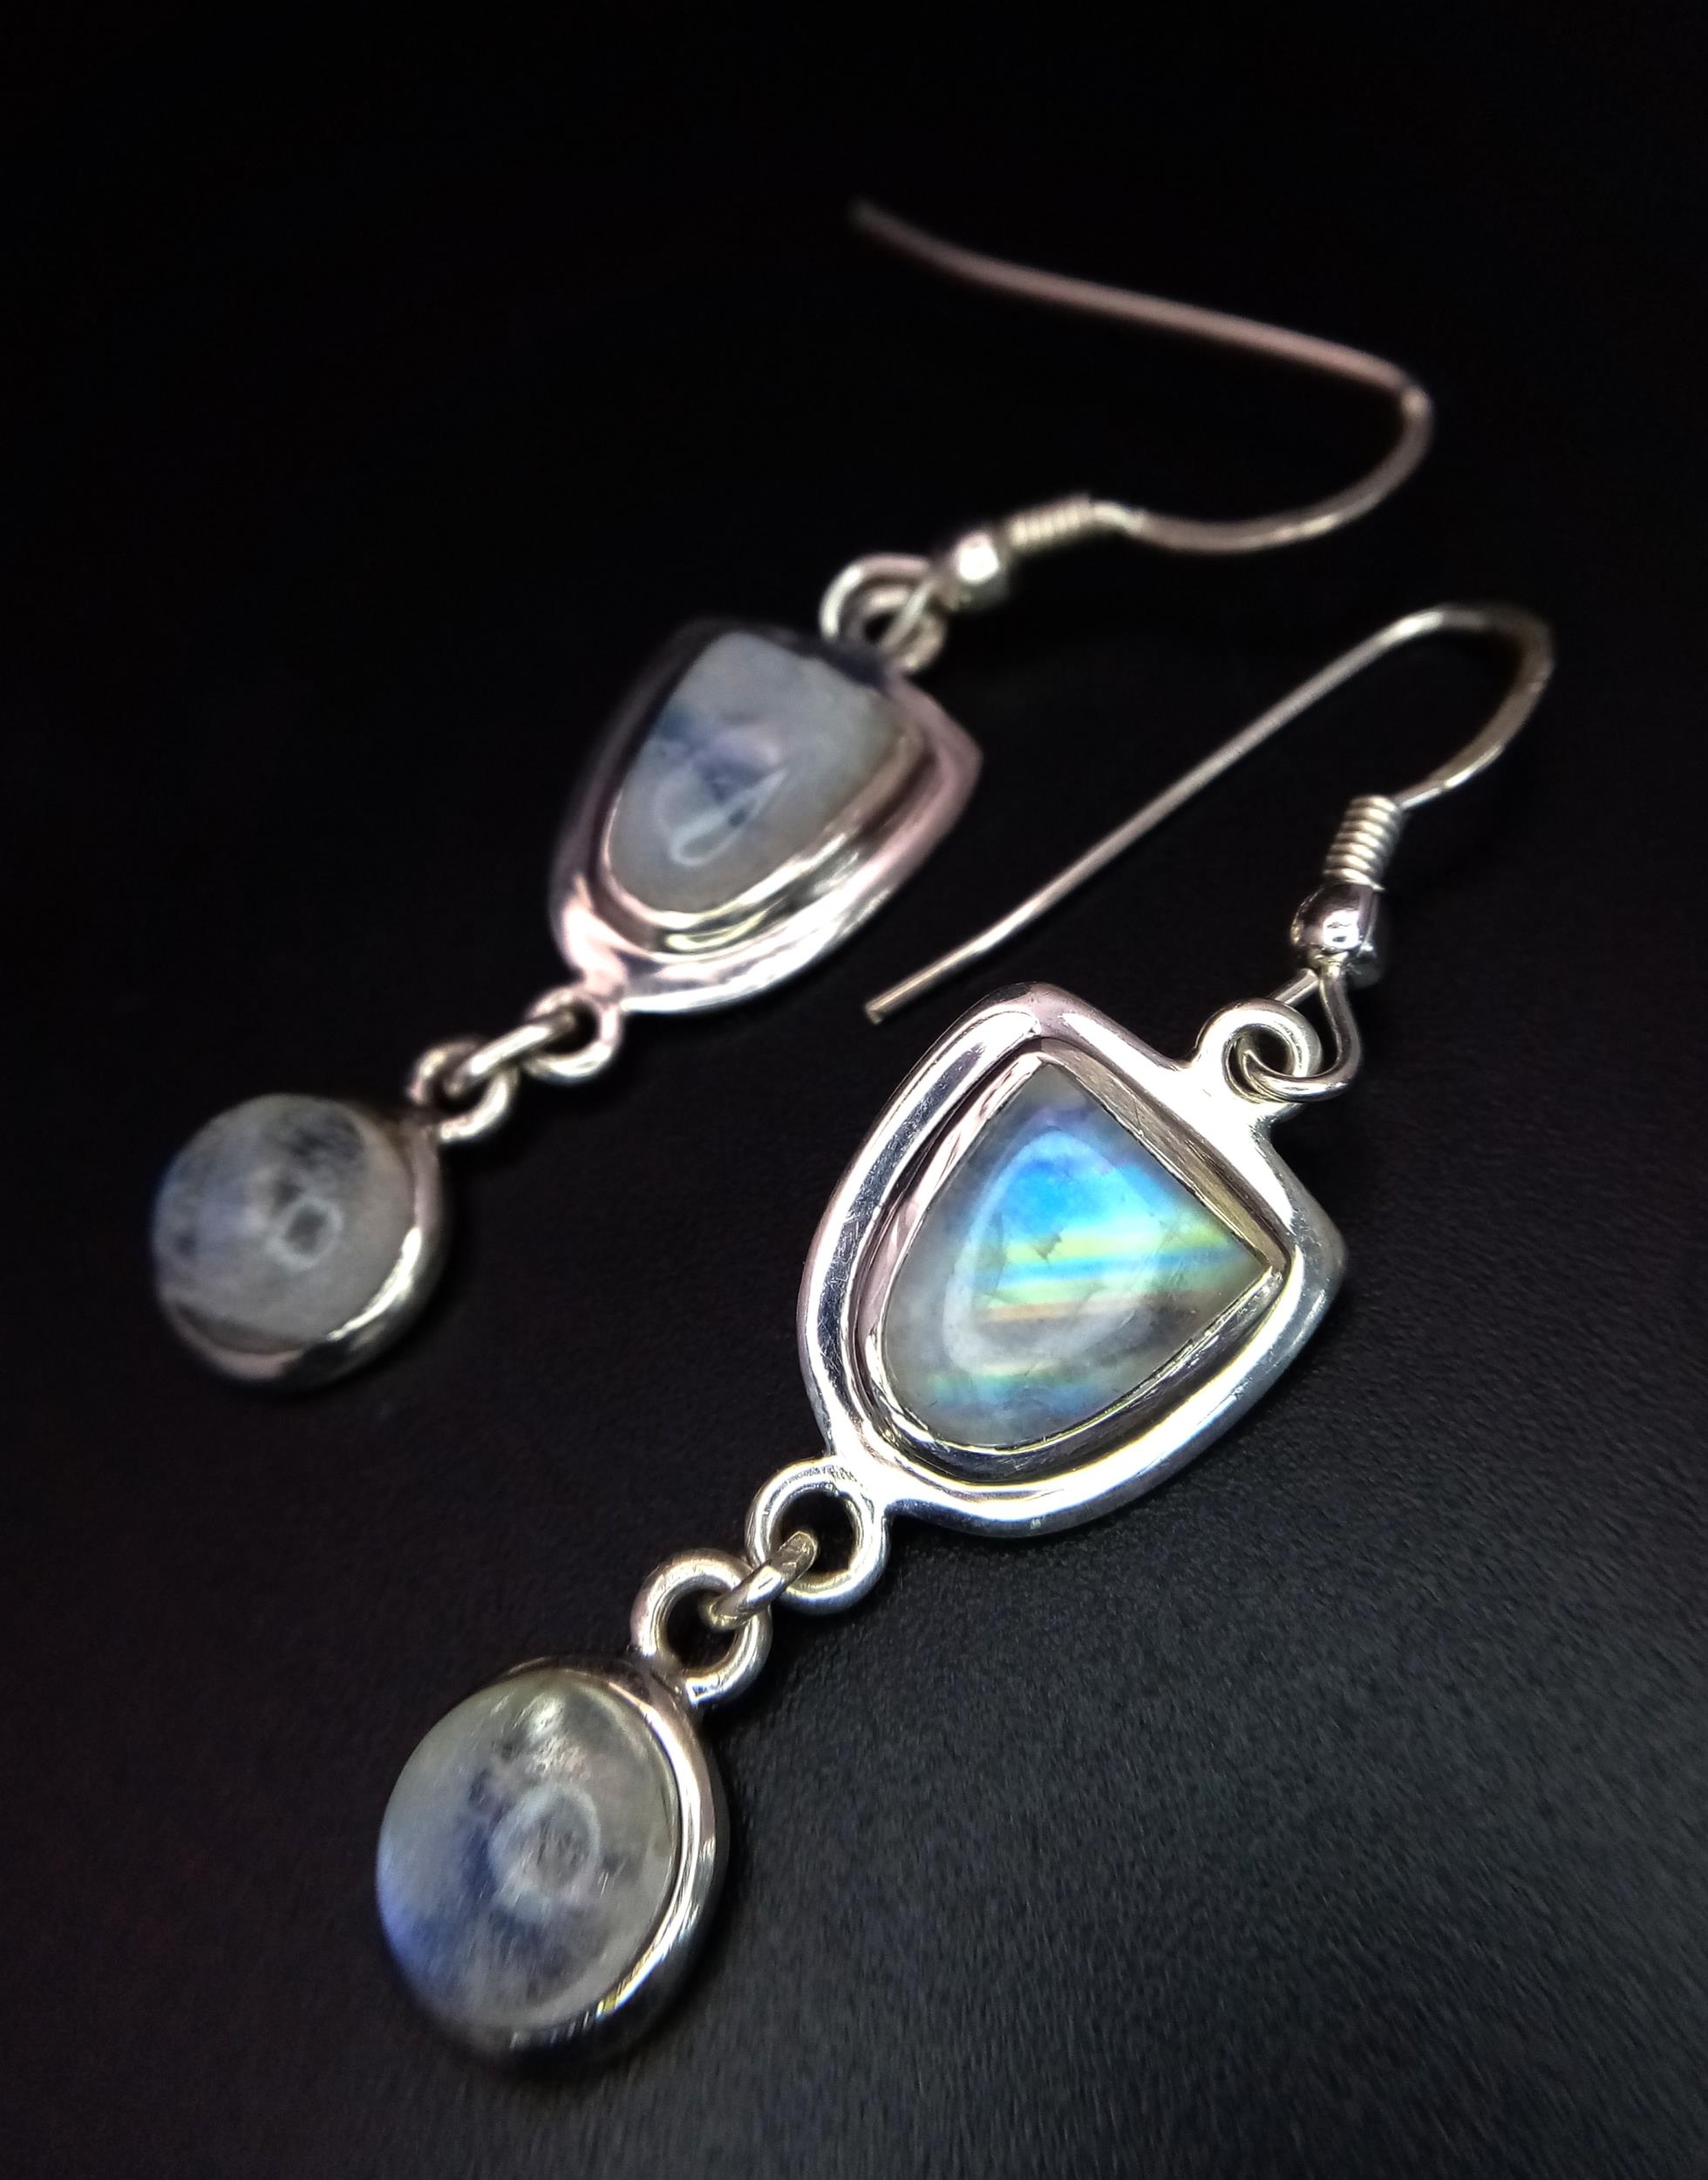 A Pair of Sterling Silver Rainbow Moonstone Earrings. 4.5cm Drop. Set with a 9mm Long Fancy Cut